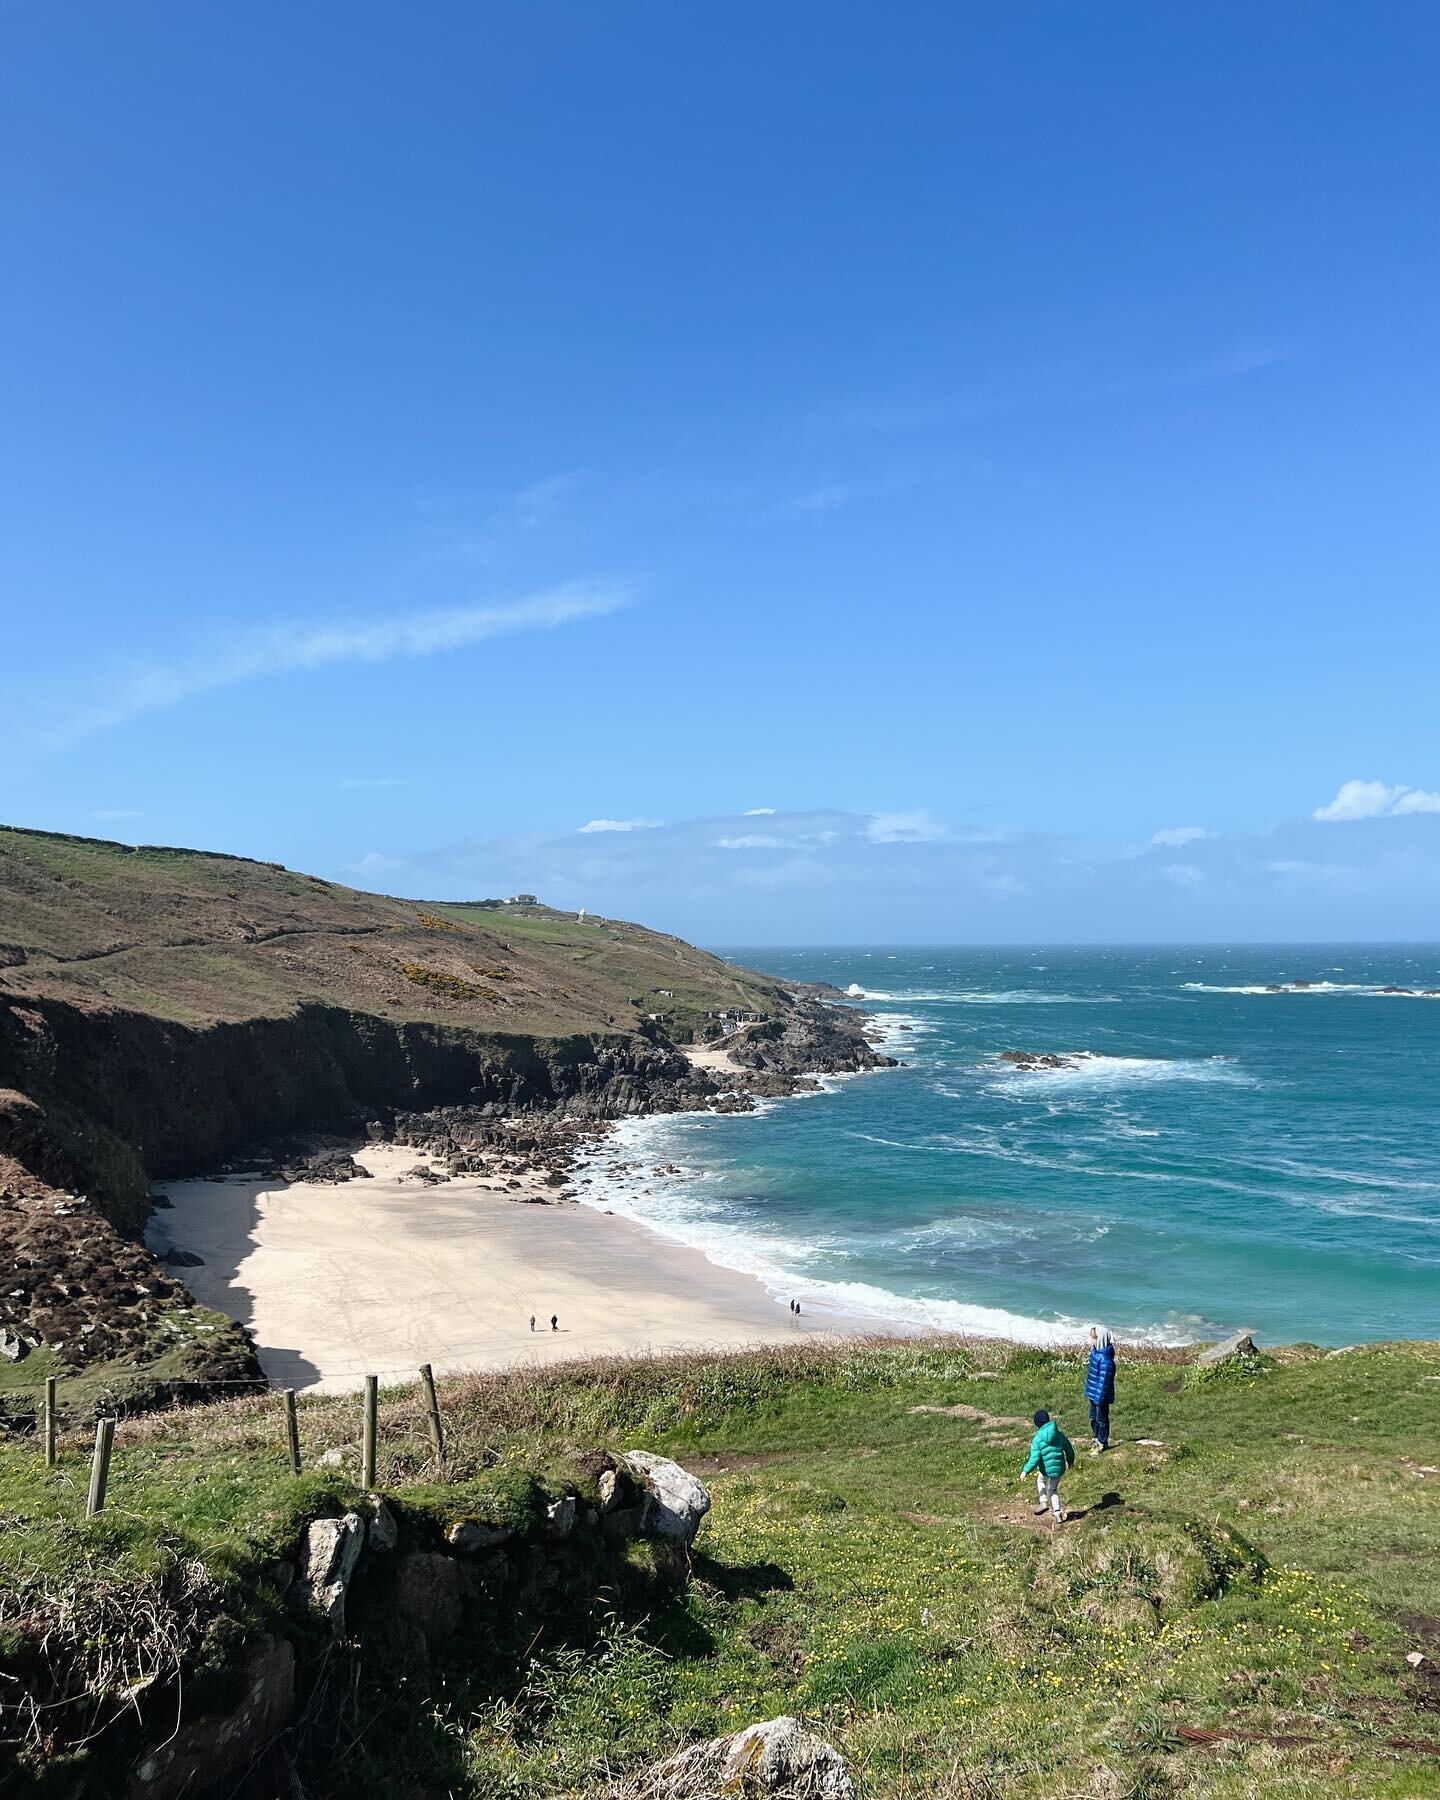 A springtime adventure along the stunning coast road from St Ives to Sennen ✨